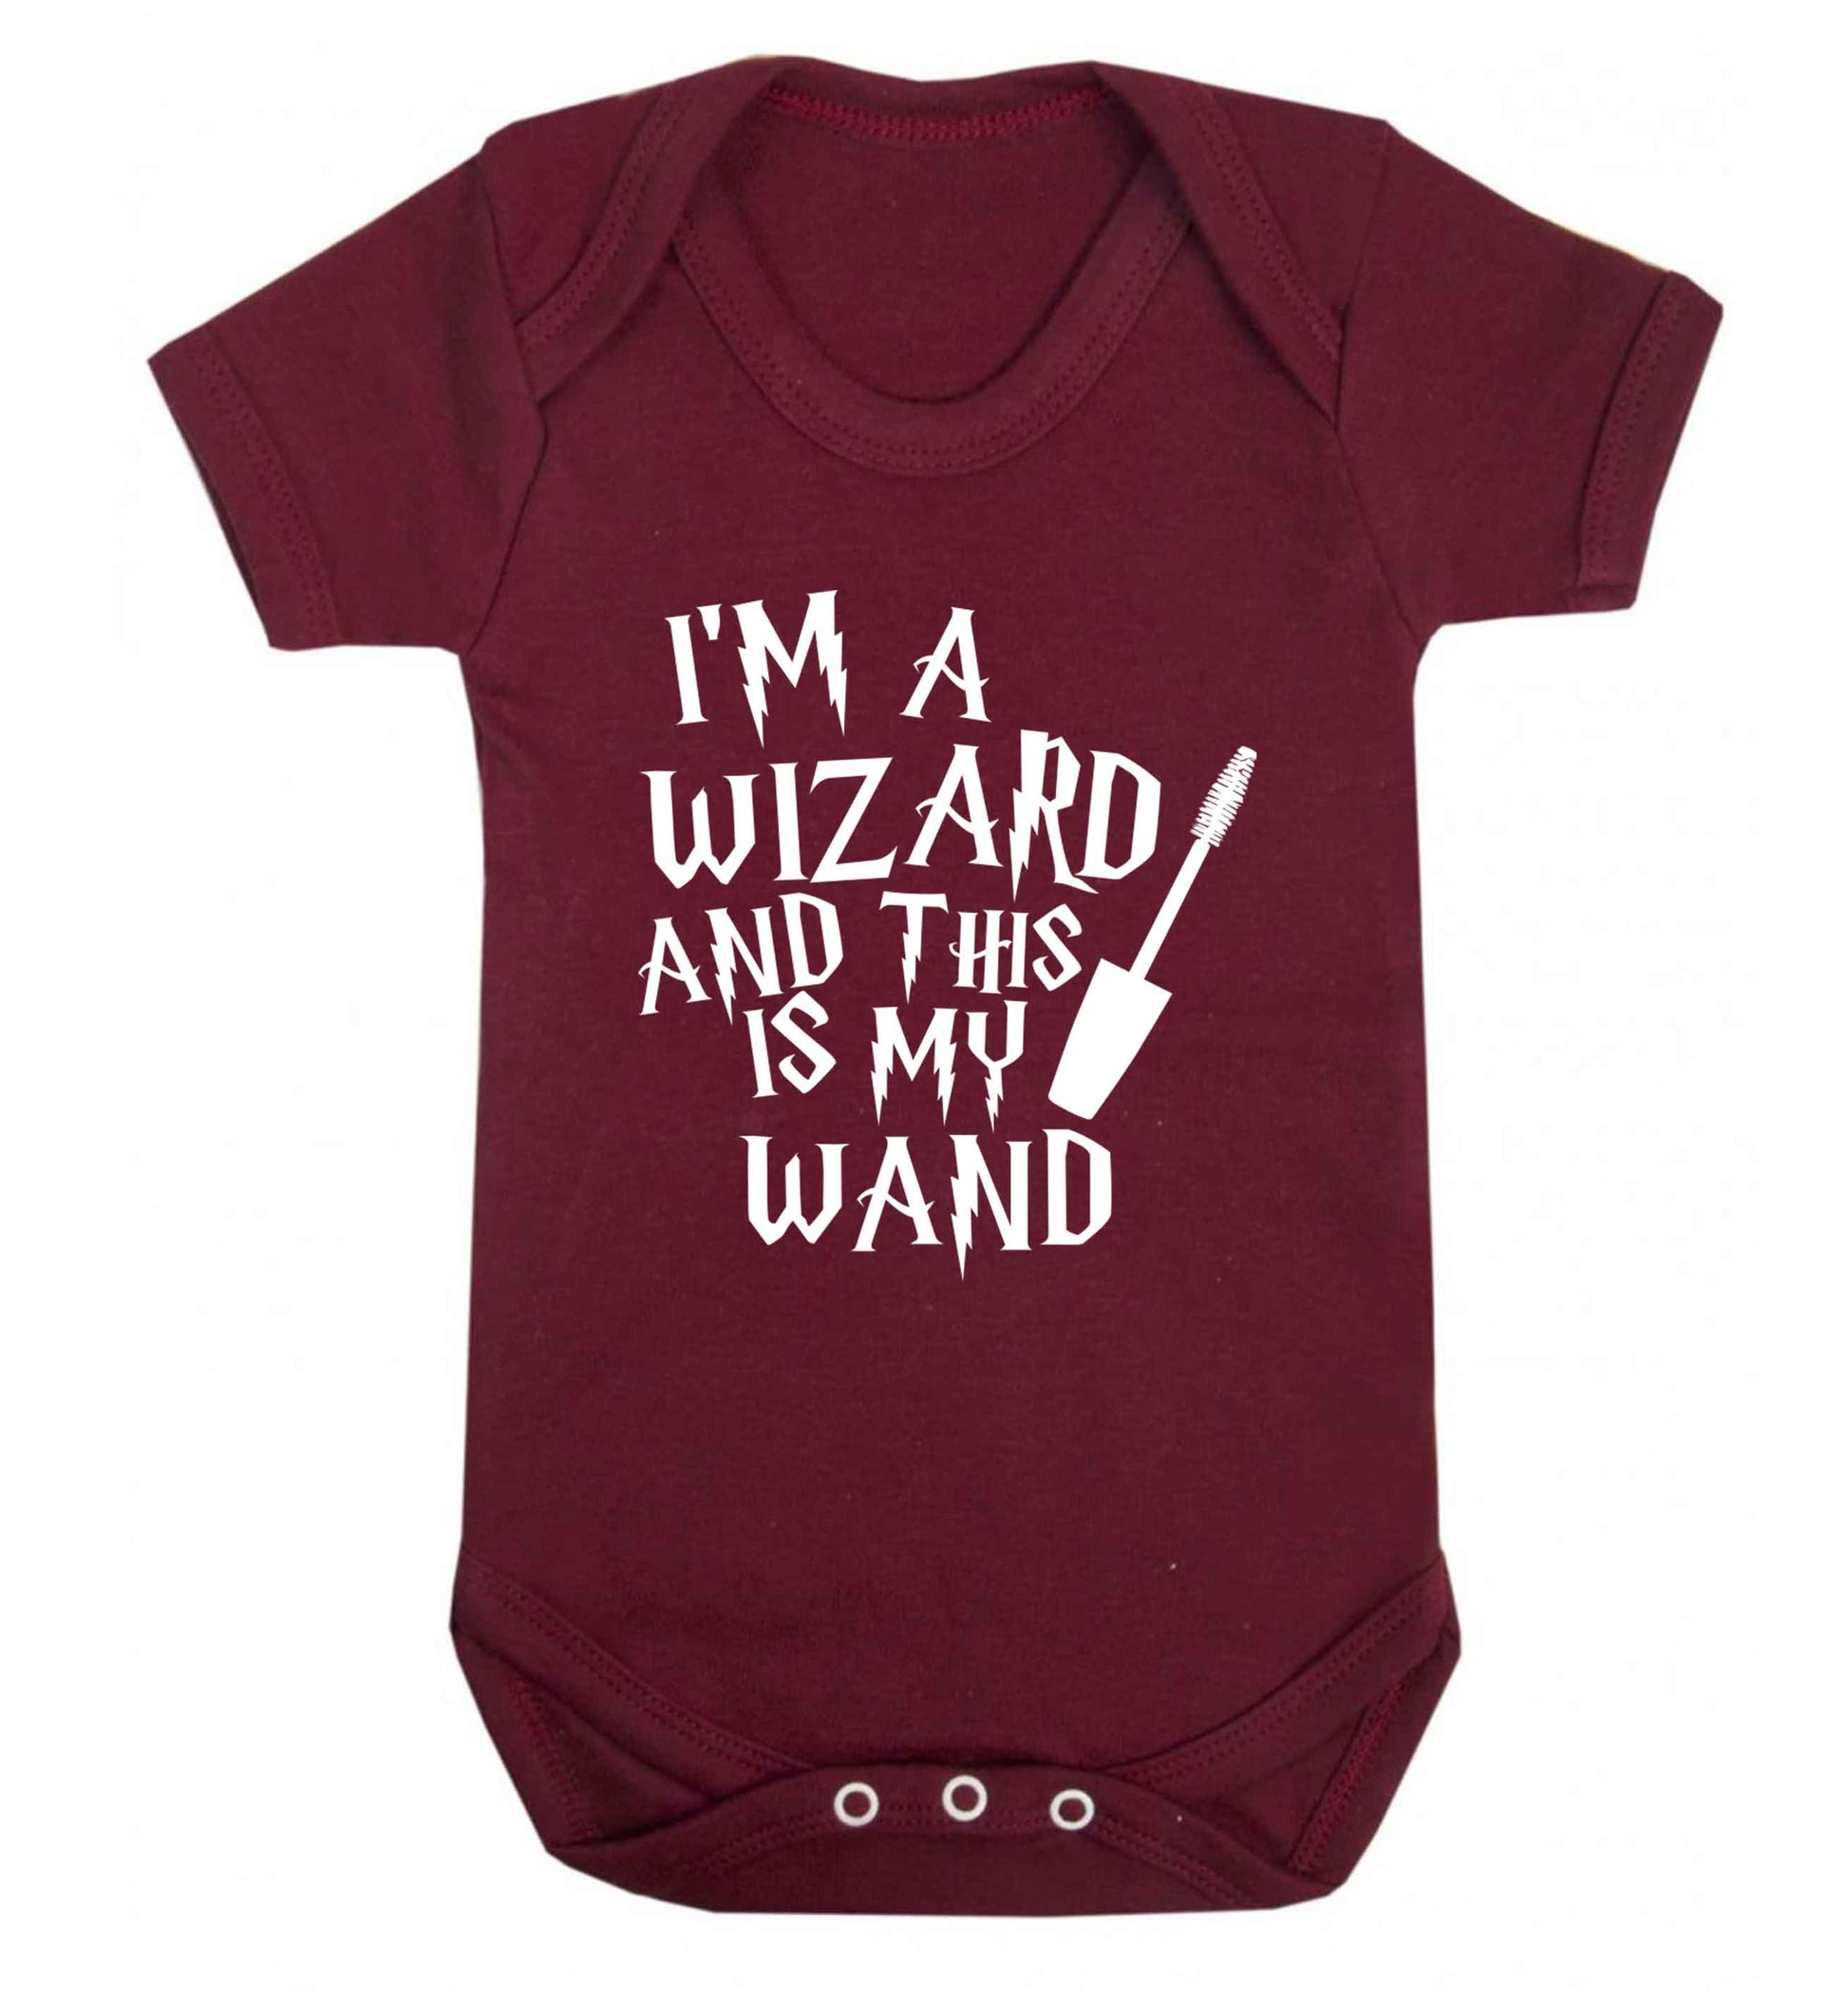 I'm a wizard and this is my wand Baby Vest maroon 18-24 months